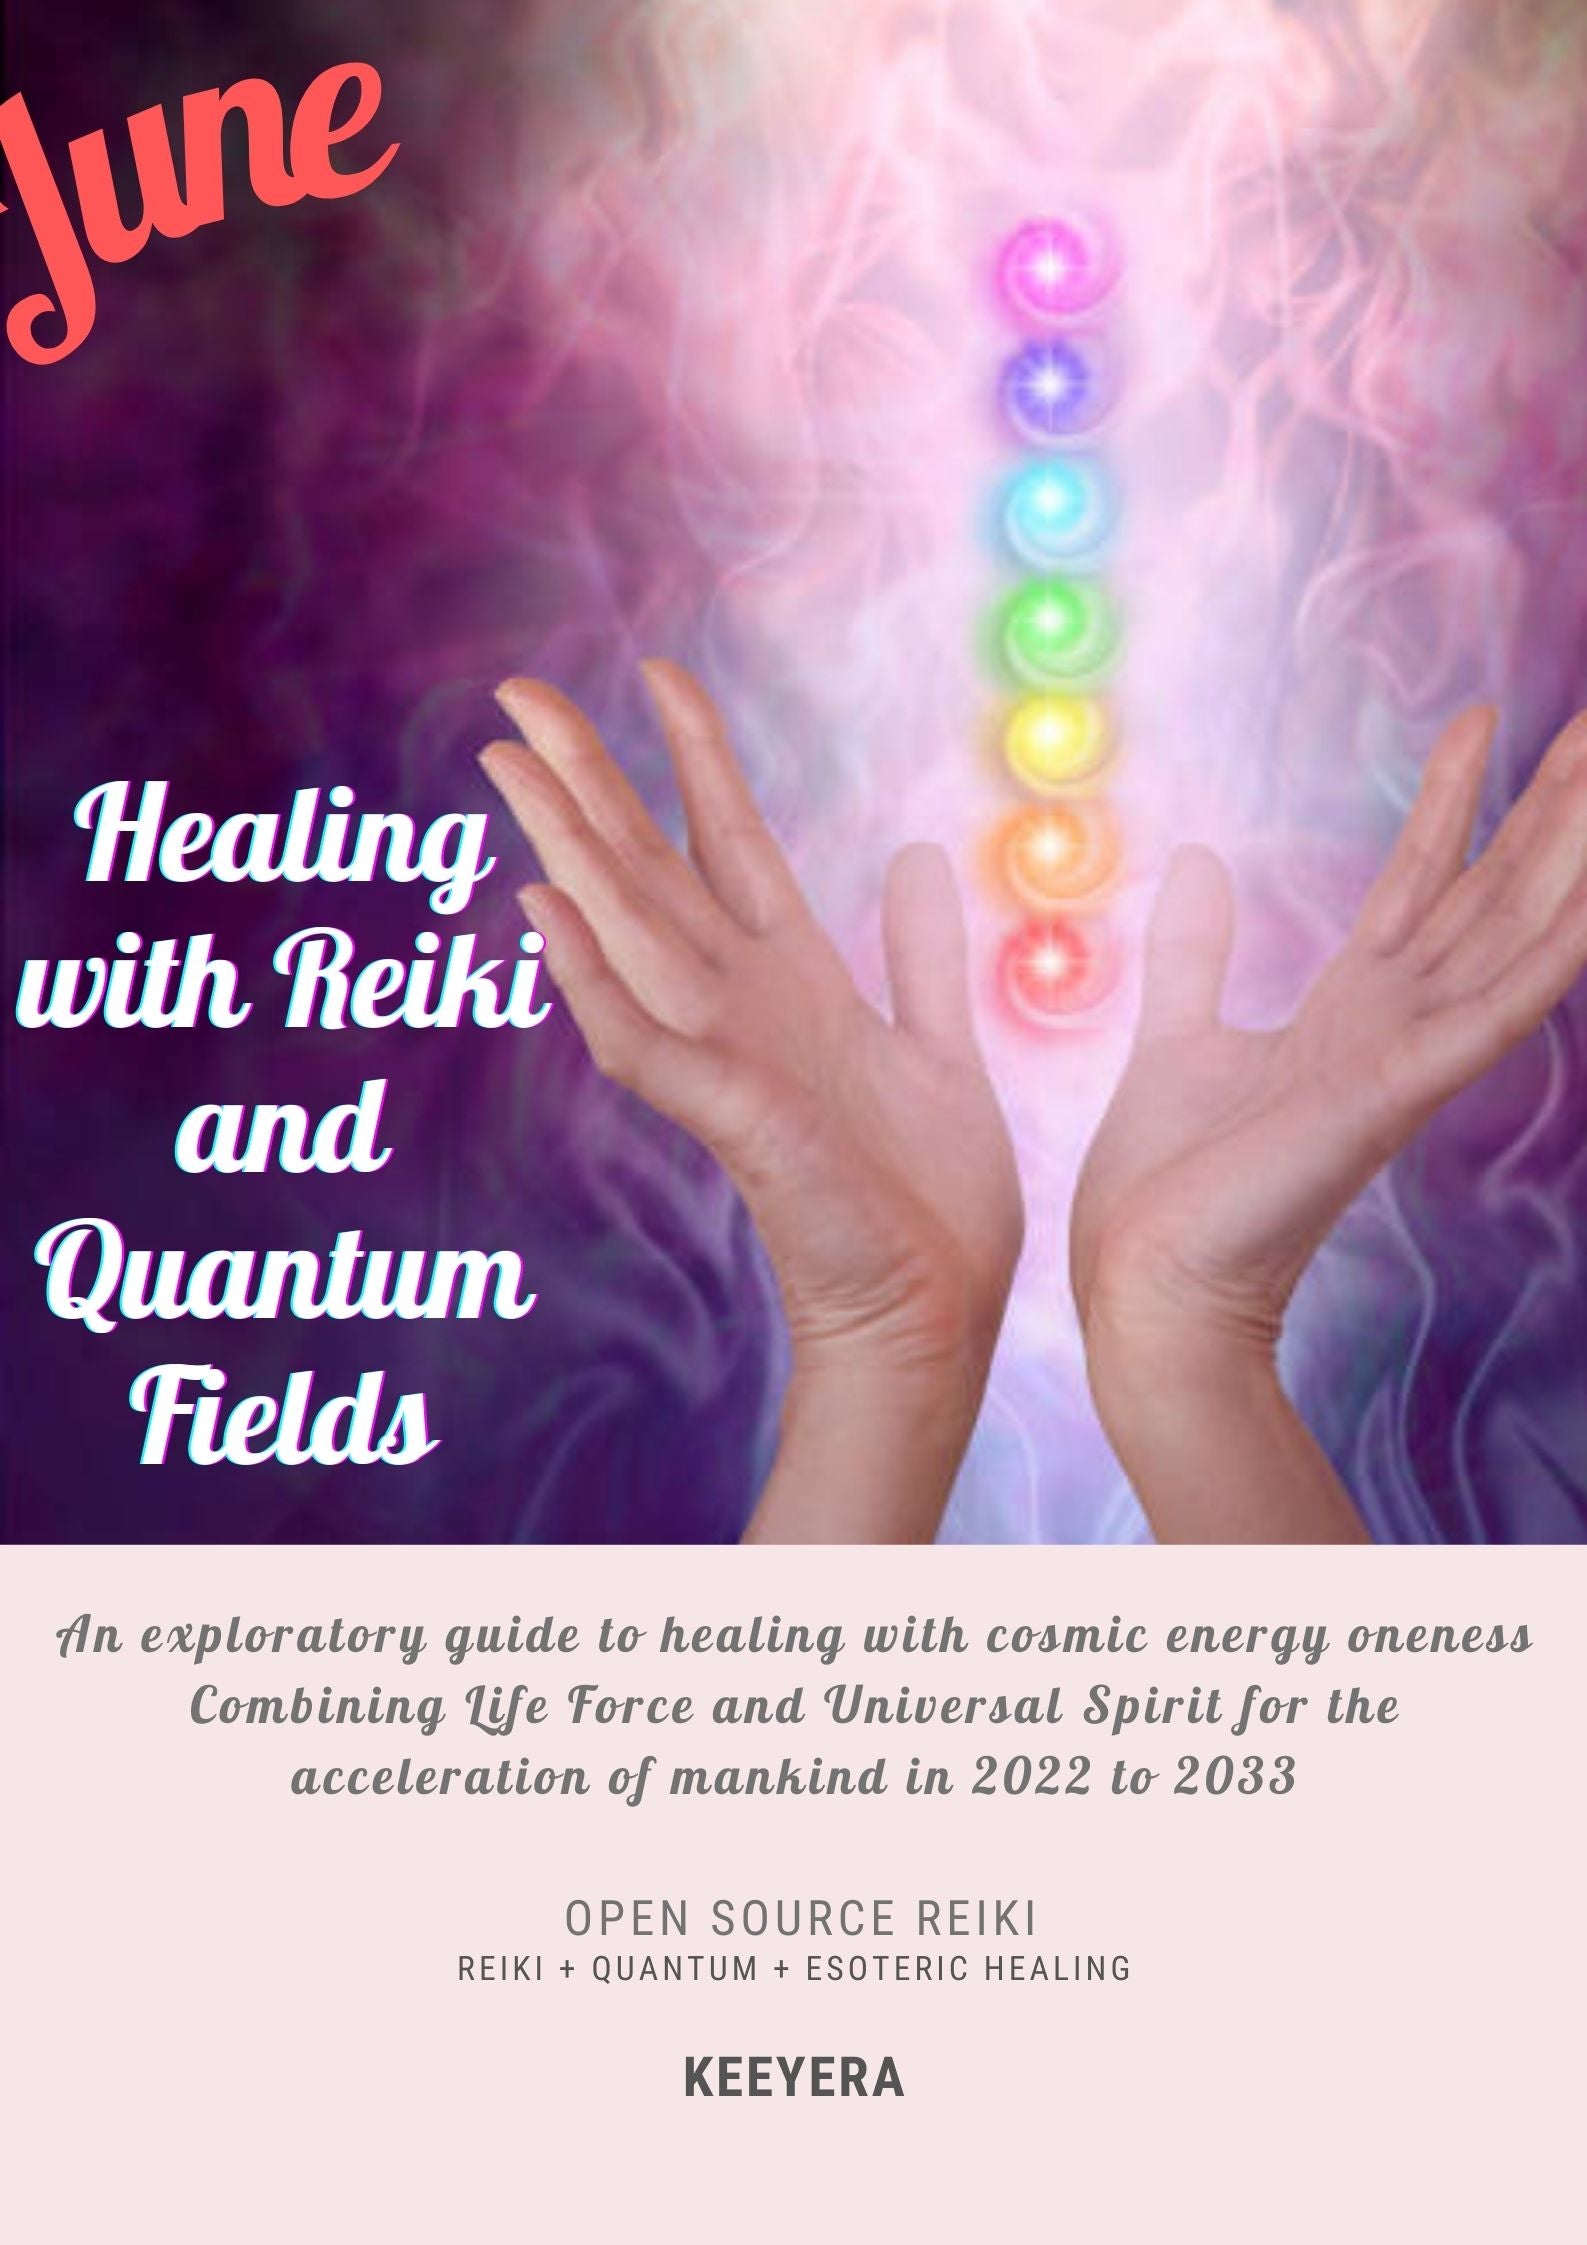 Alchemy Sessions - Healing with Reiki and Quantum Fields